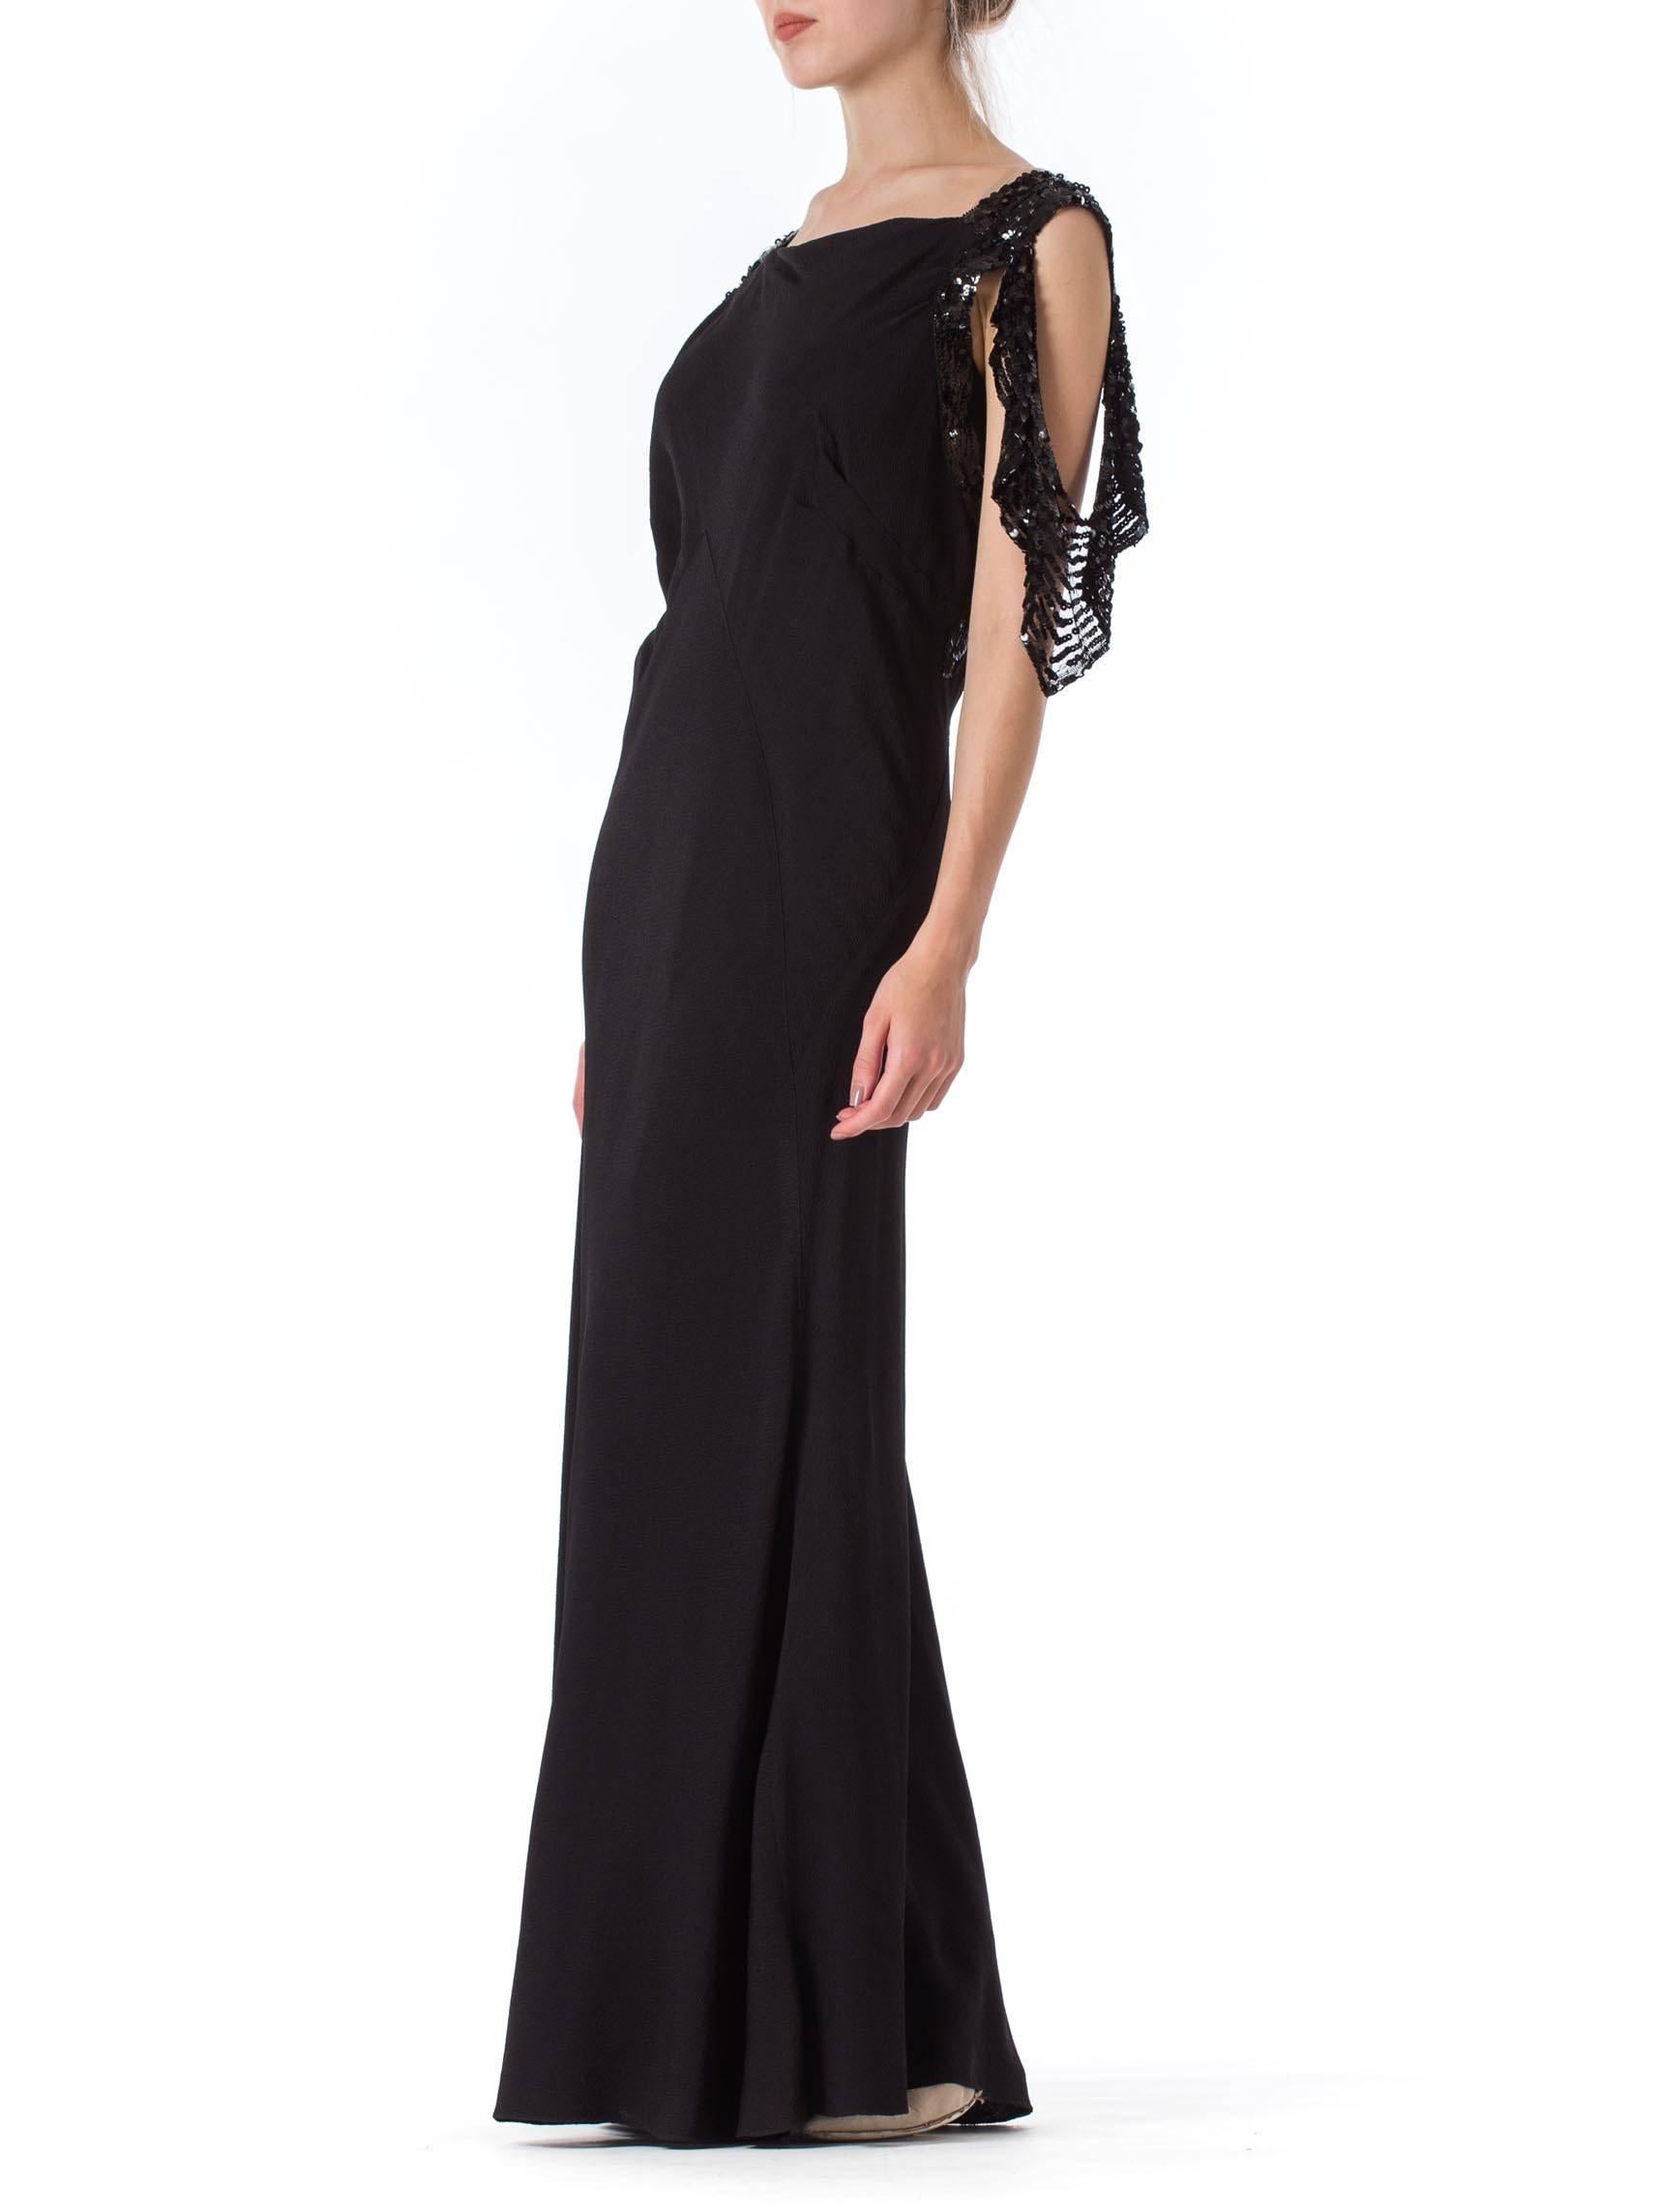 1930S Black Bias Cut Rayon Crepe Gown With Celluloid Sequin Peek-A-Boo Sleeves For Sale 1